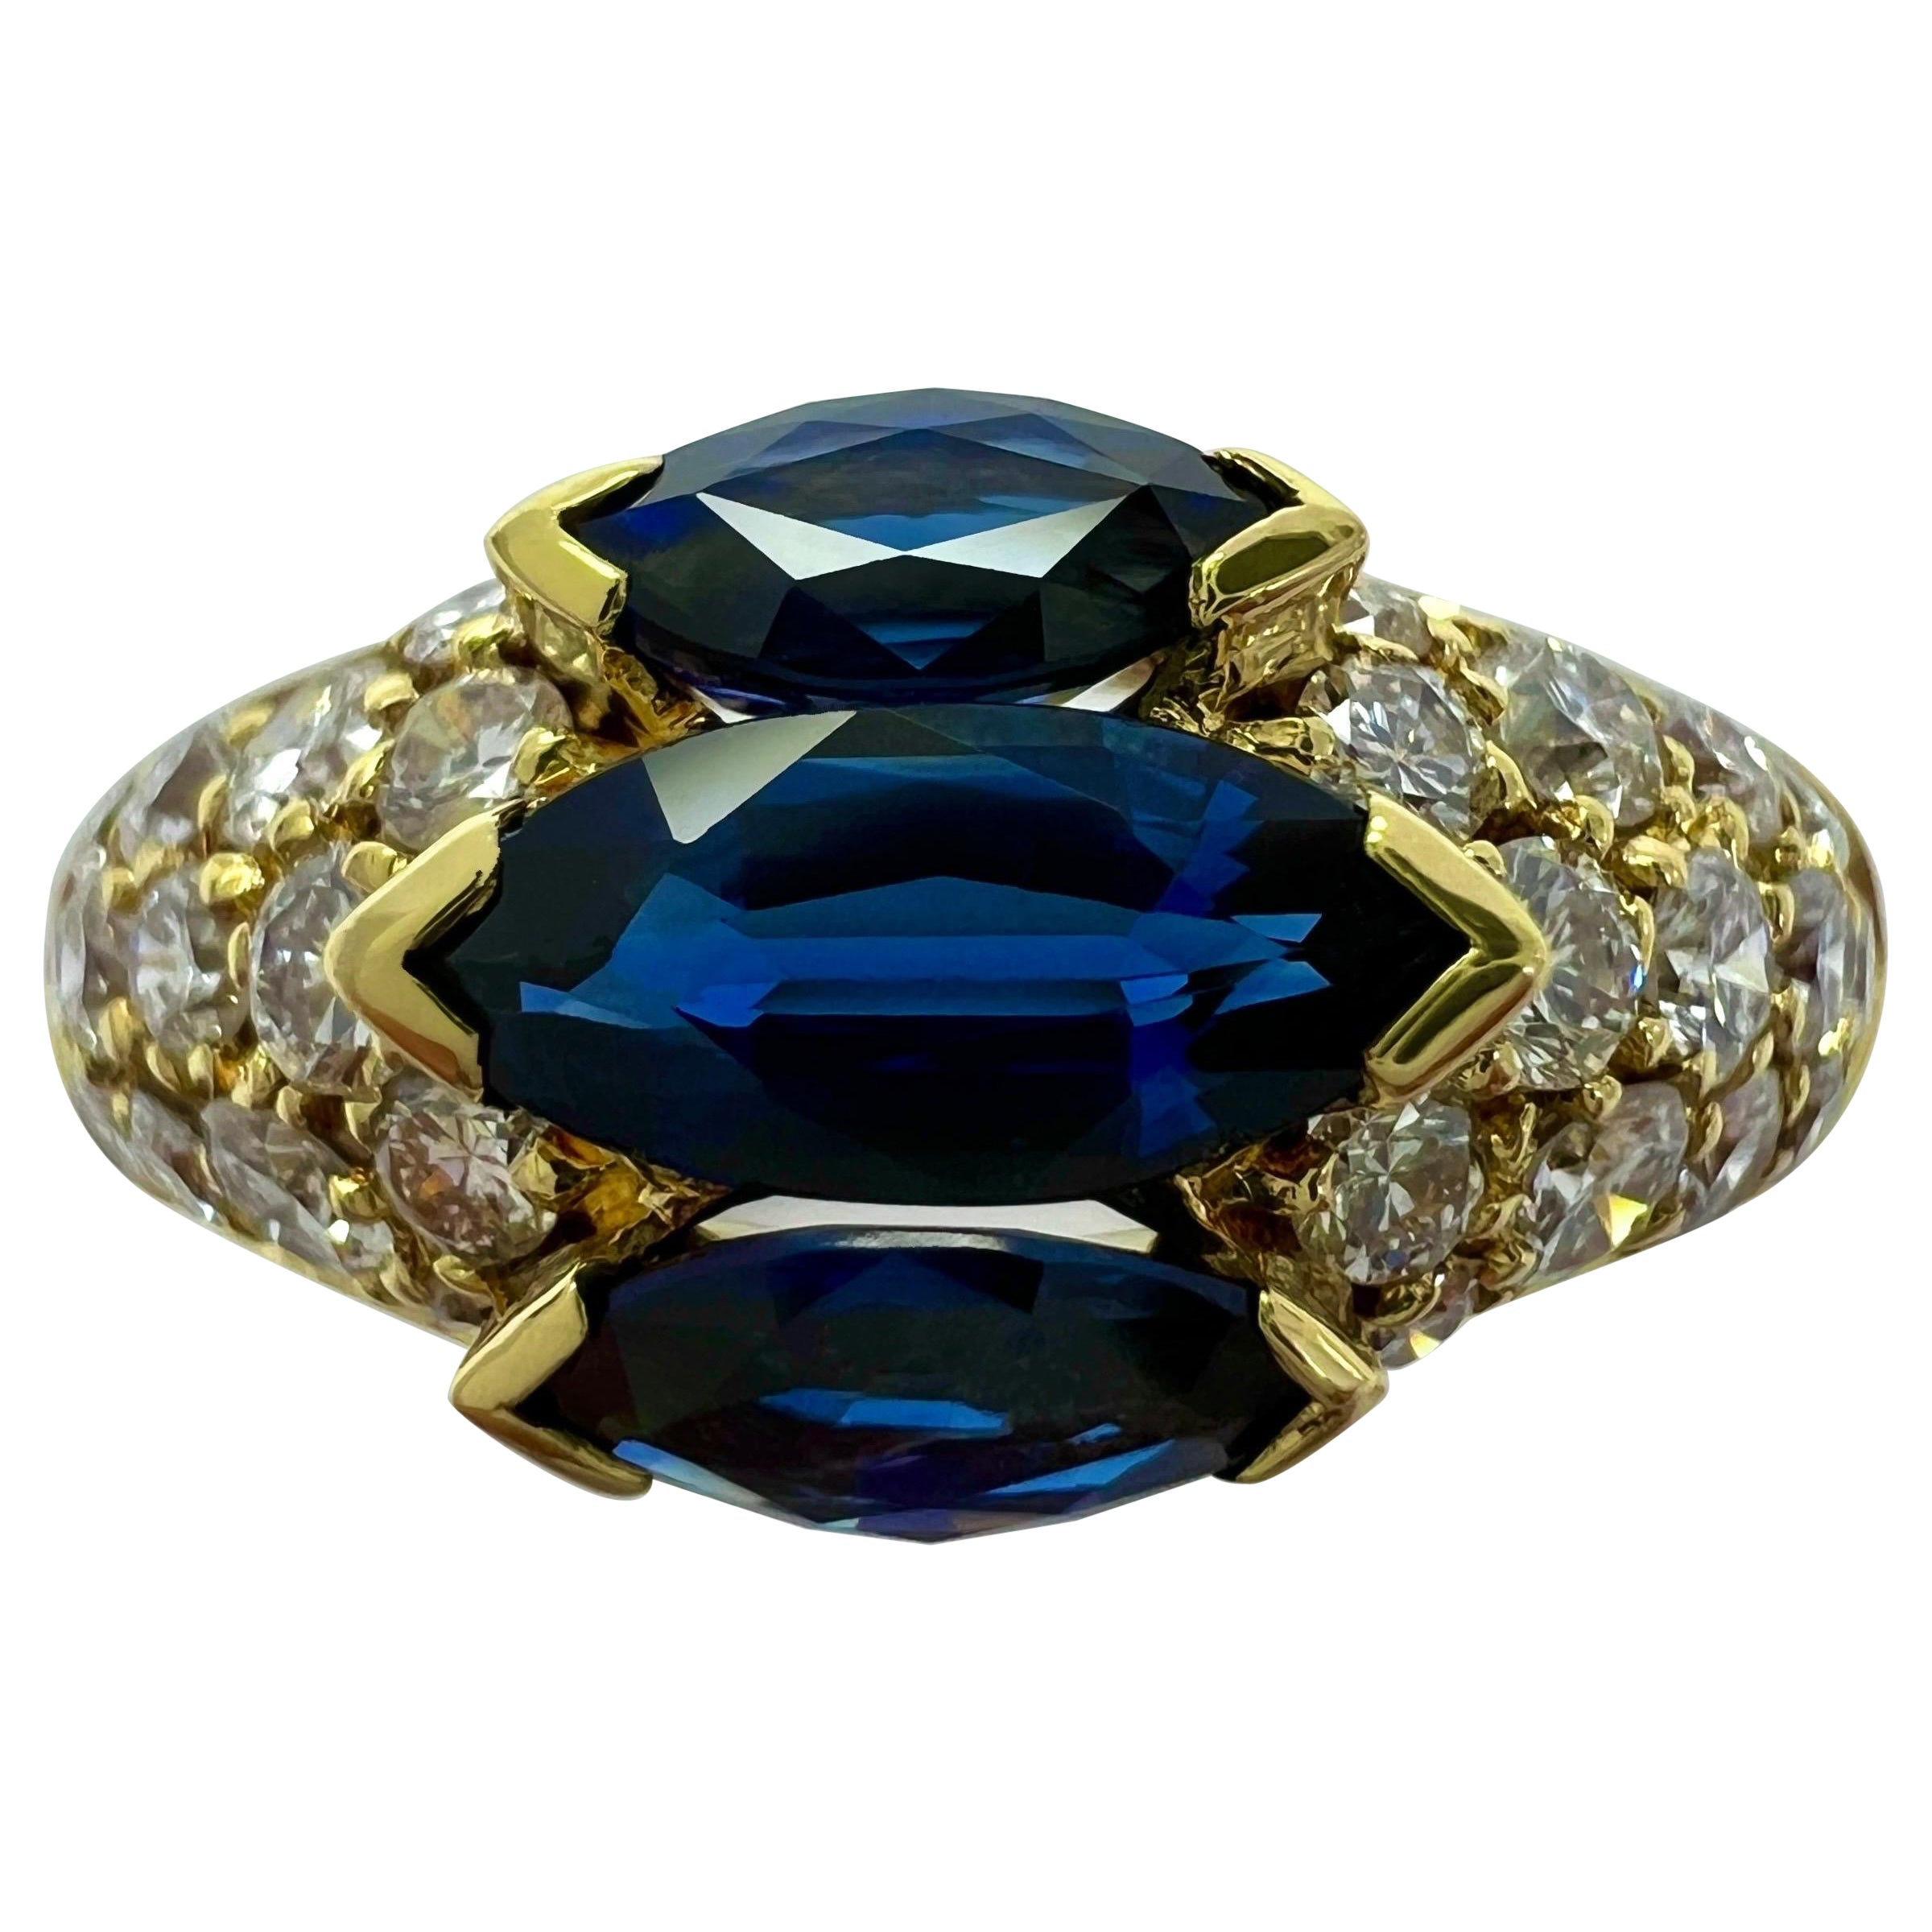 Rare Vintage Van Cleef & Arpels Marquise Blue Sapphire And Diamond Cocktail Ring For Sale